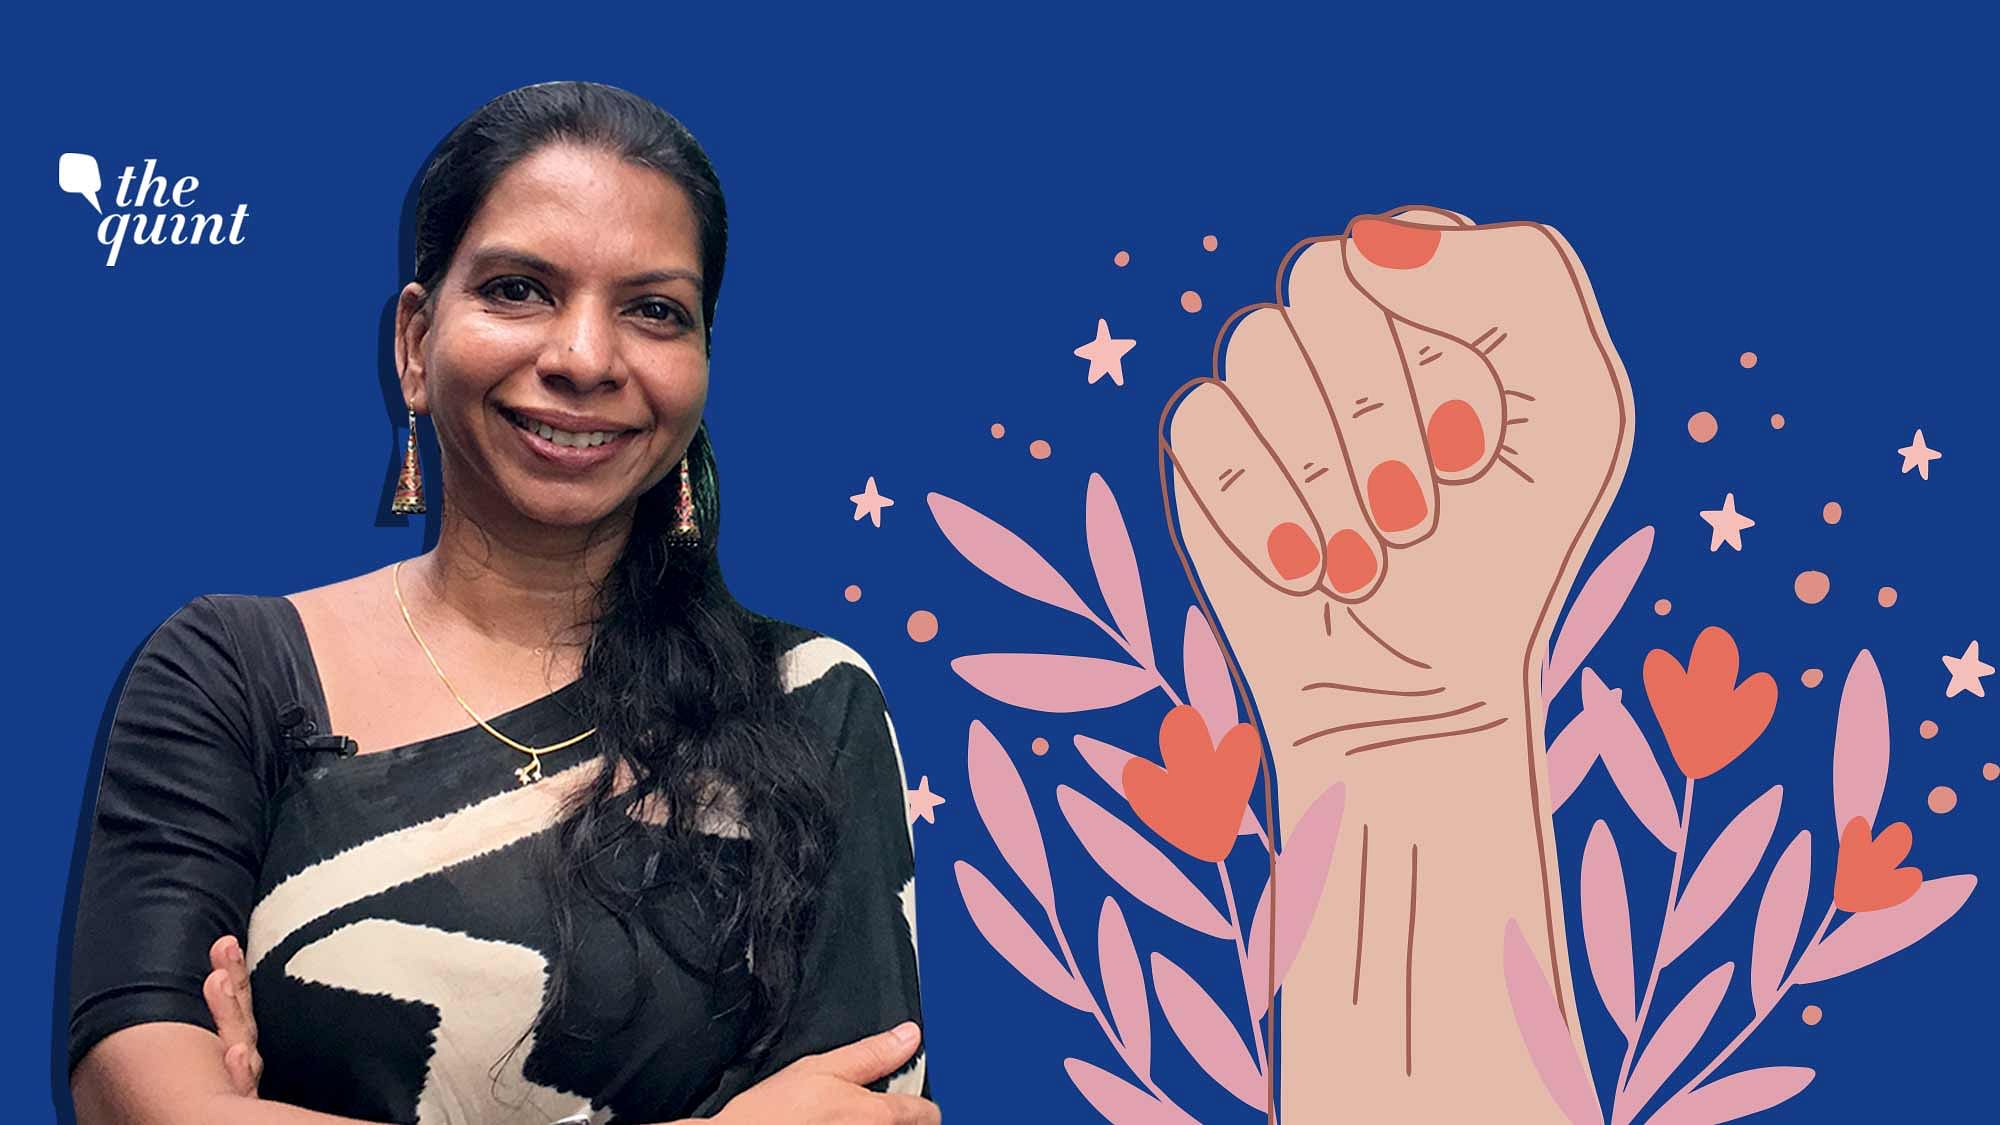 Kutti Revathi, a Tamil poet and activist believes women are strong individuals capable of changing the world.